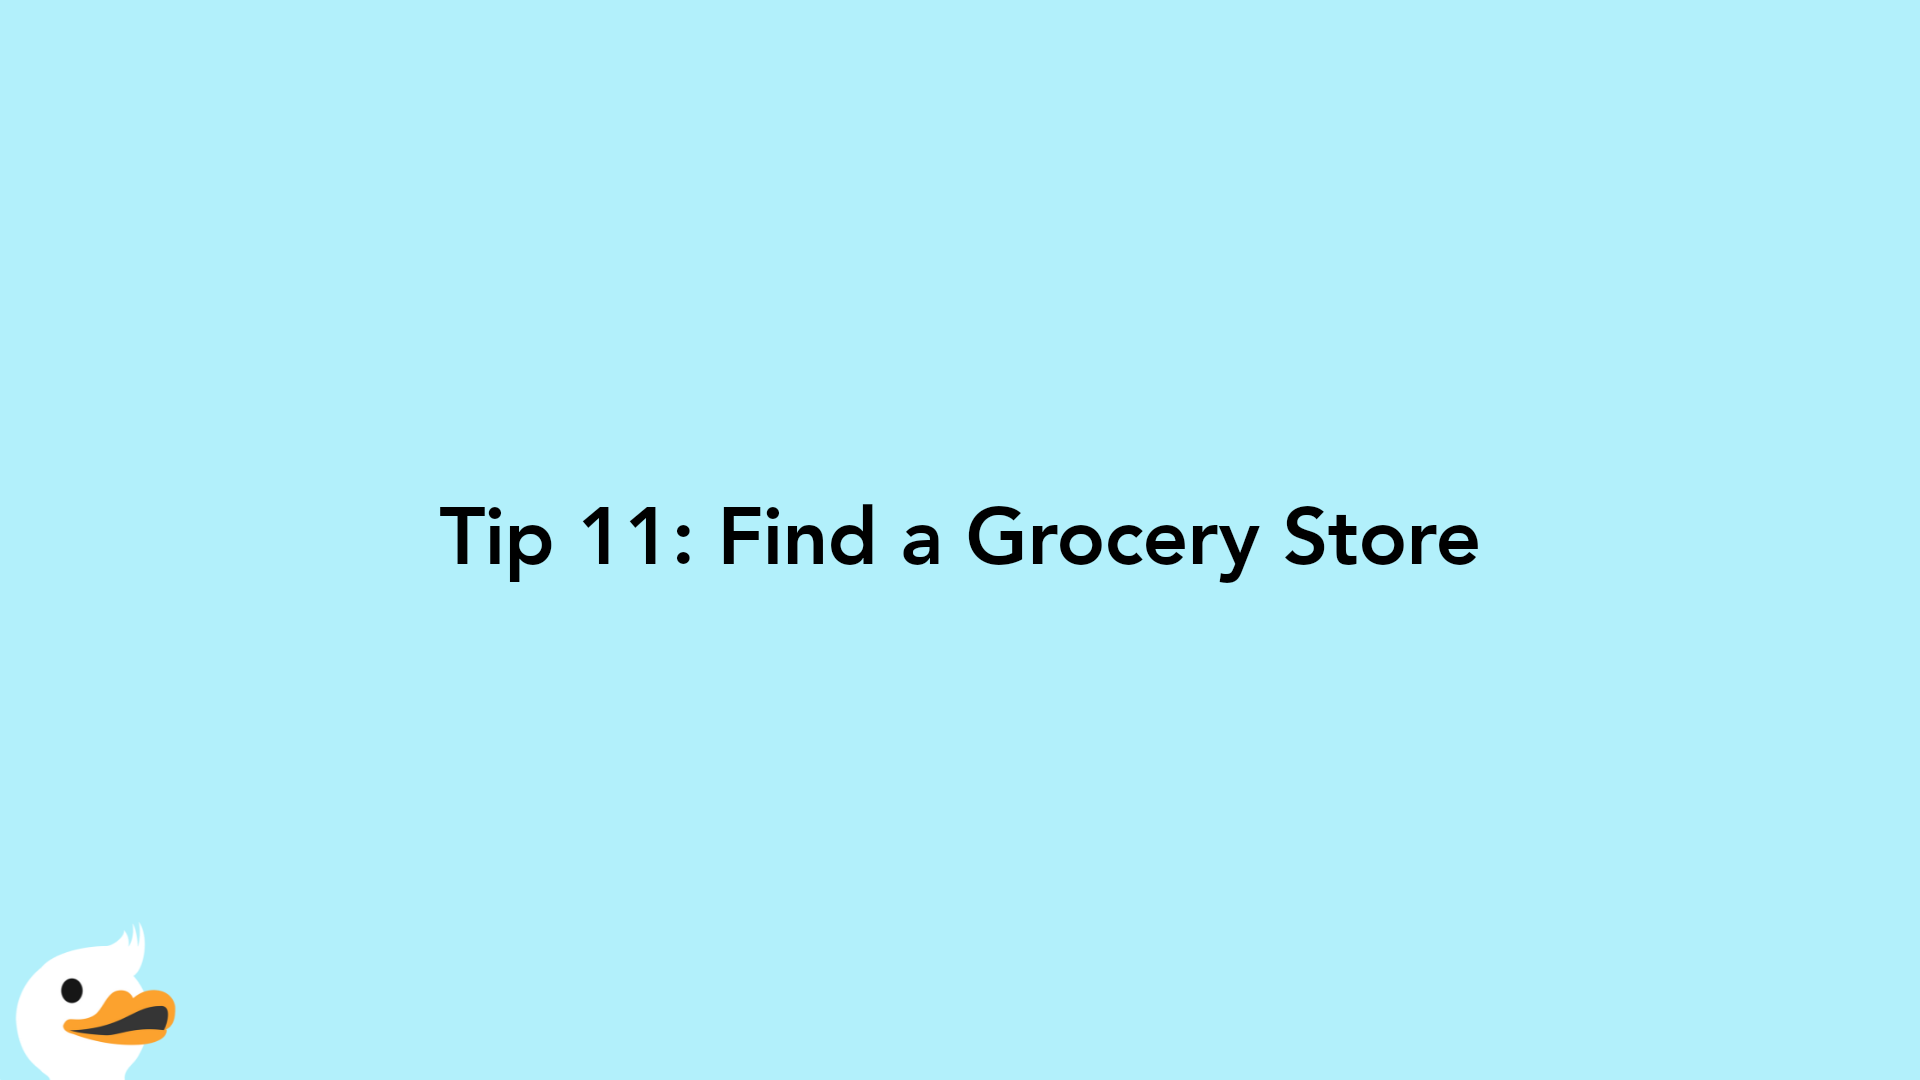 Tip 11: Find a Grocery Store